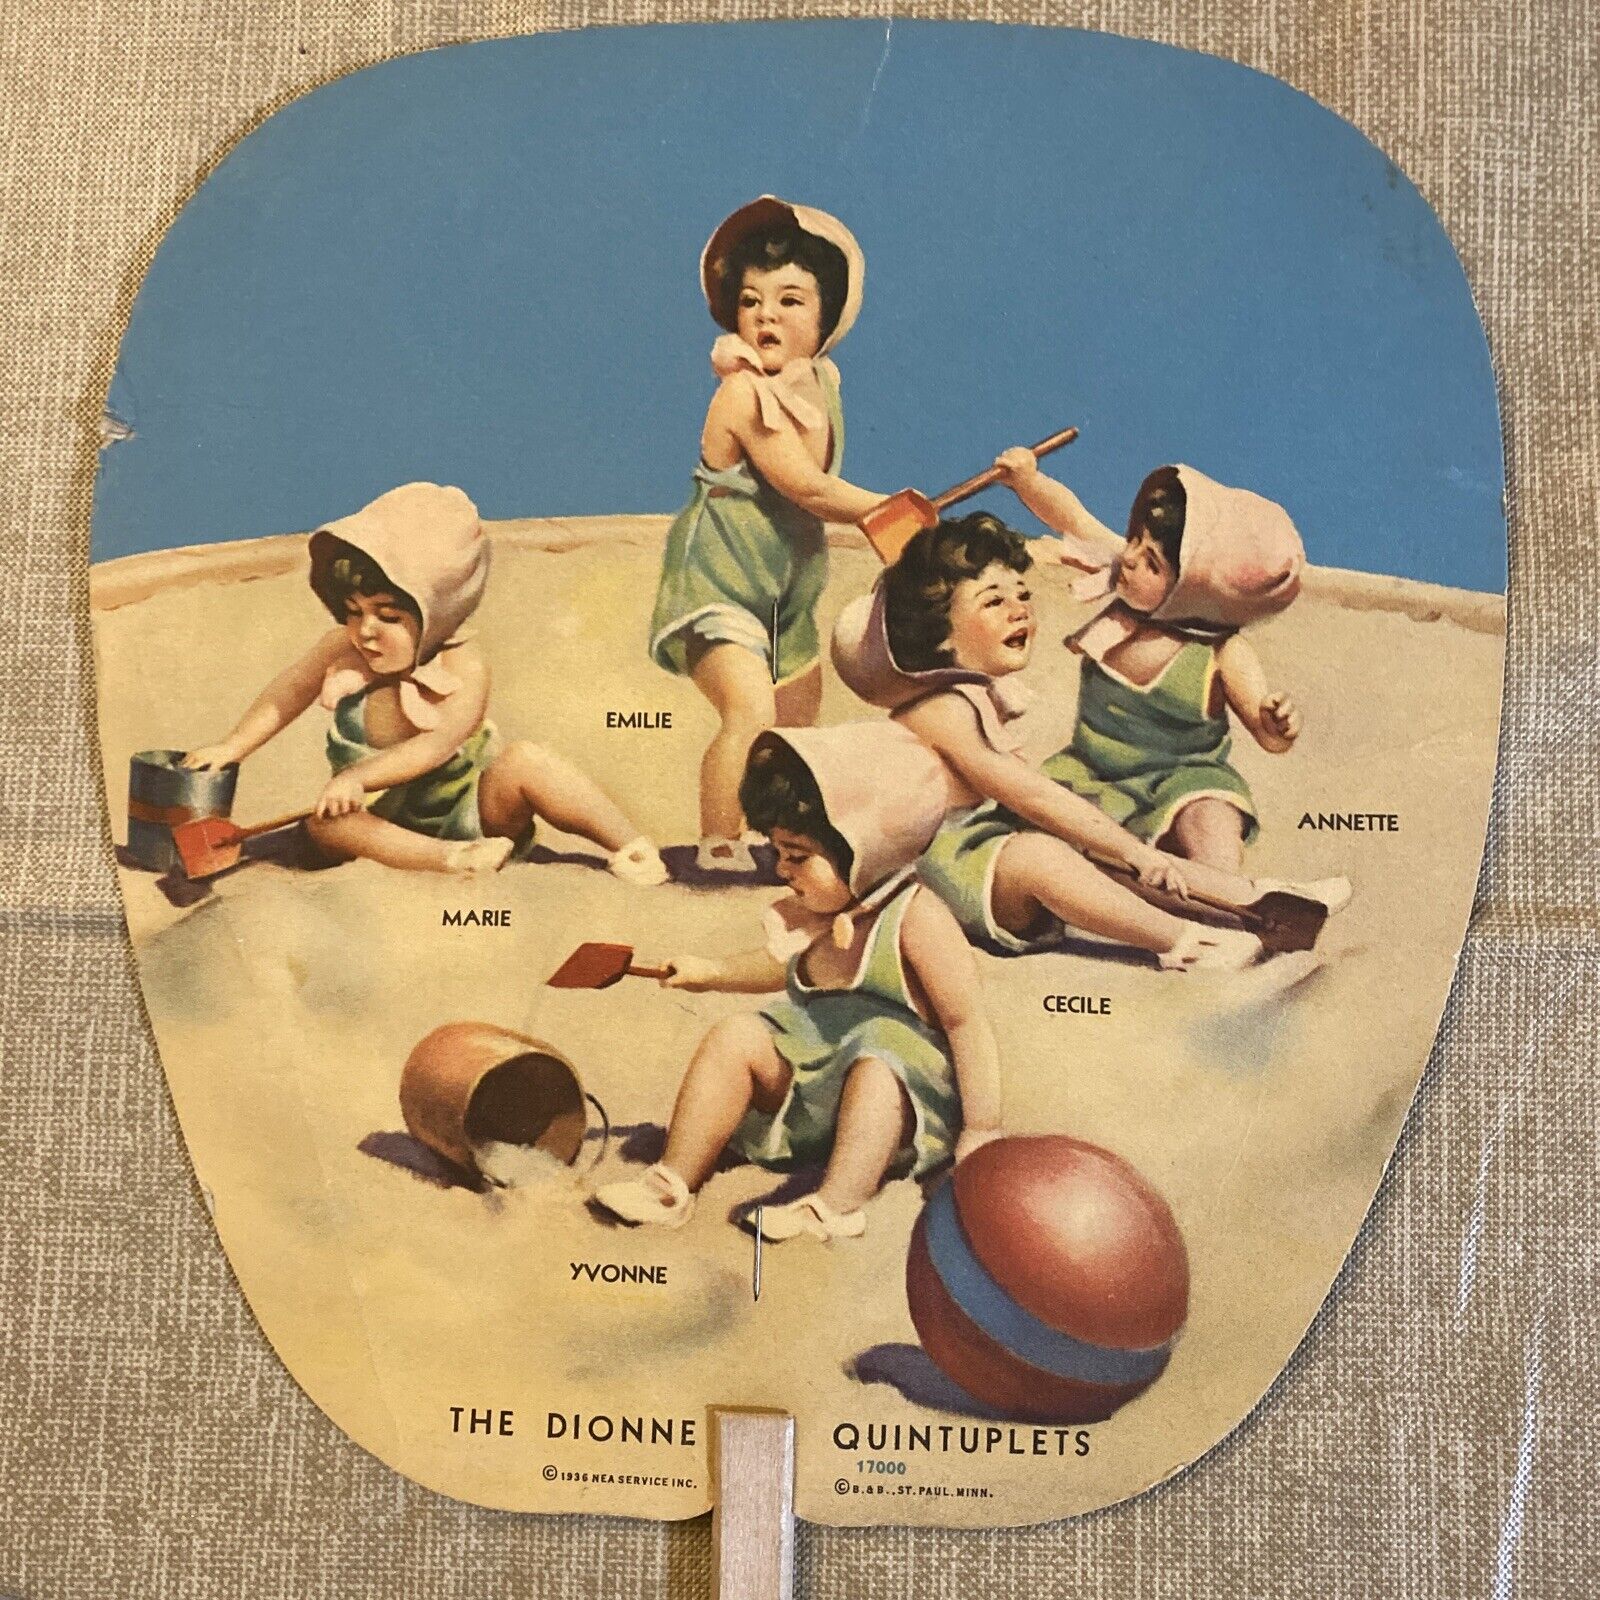 “THE DIONNE QUINTUPLETS”, 1936 Hand Fan, MYERS BROTHERS, Springfield, Il